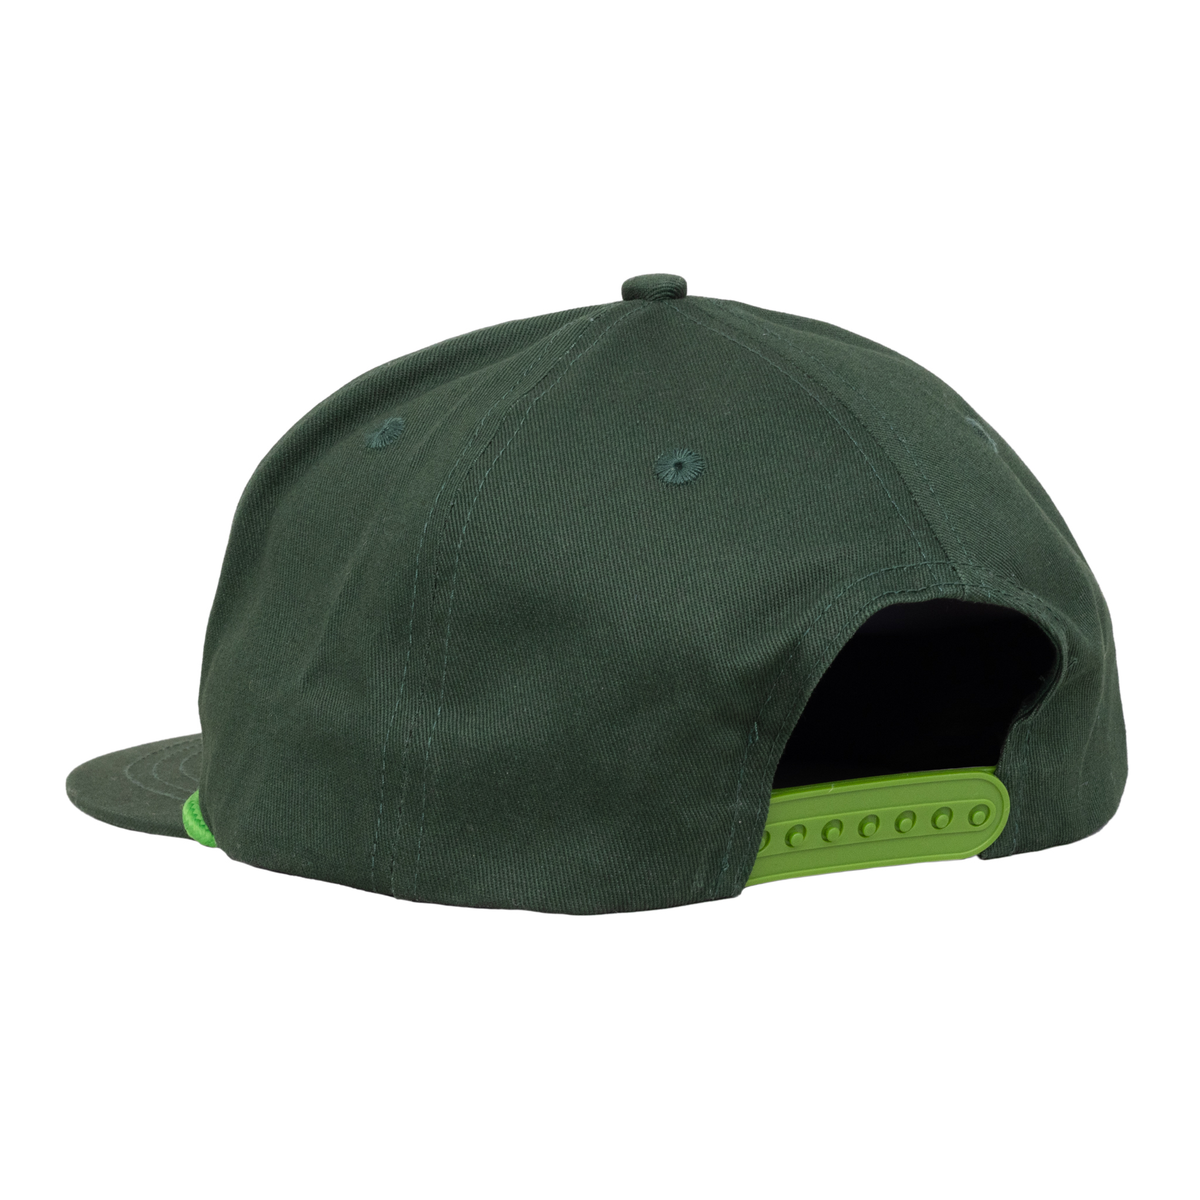 Pale Ale Unstructured Hat Green